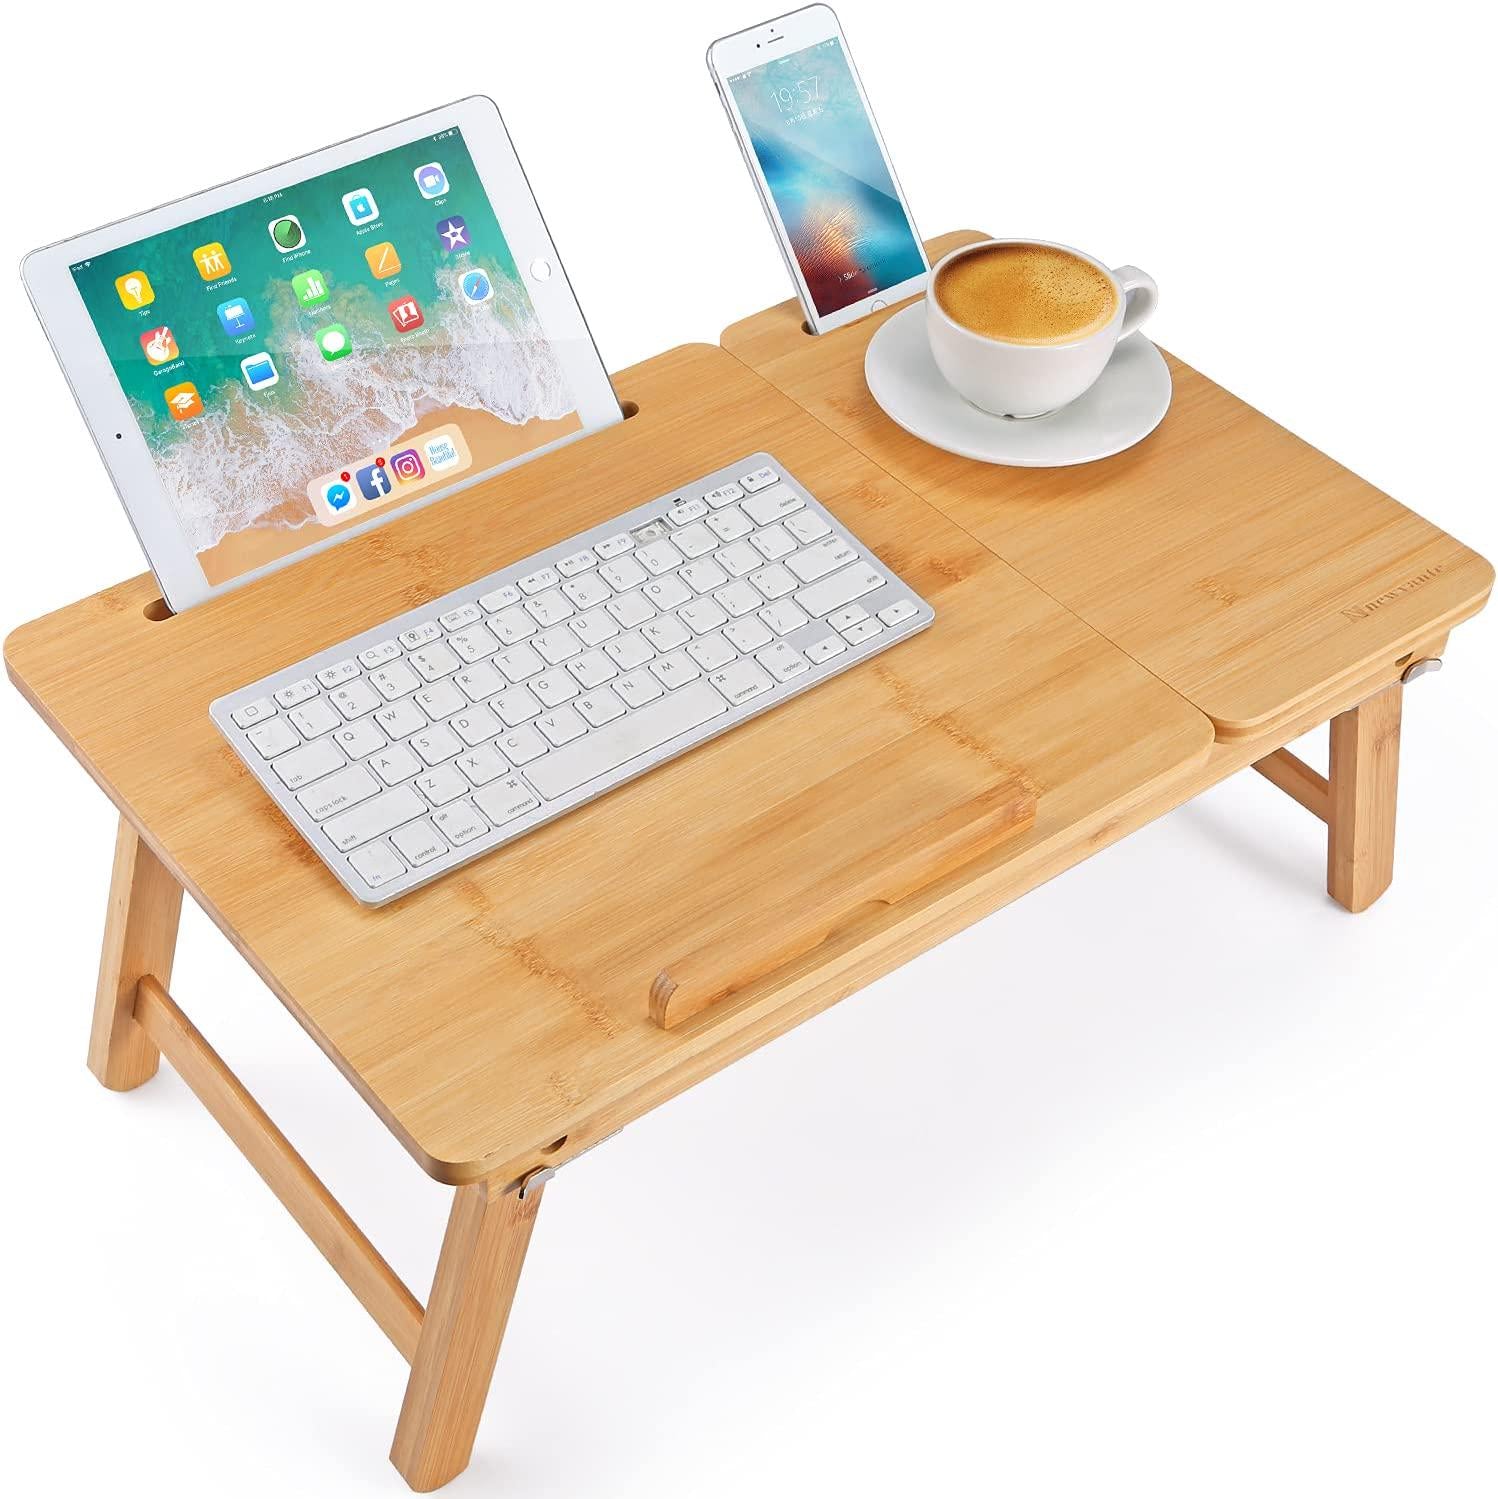 newvante, Laptop Desk Newvante Bed Tray Table Foldable Lap Desk Bamboo Breakfast Serving Tray w' Tilting Top Drawer Tablet Slots